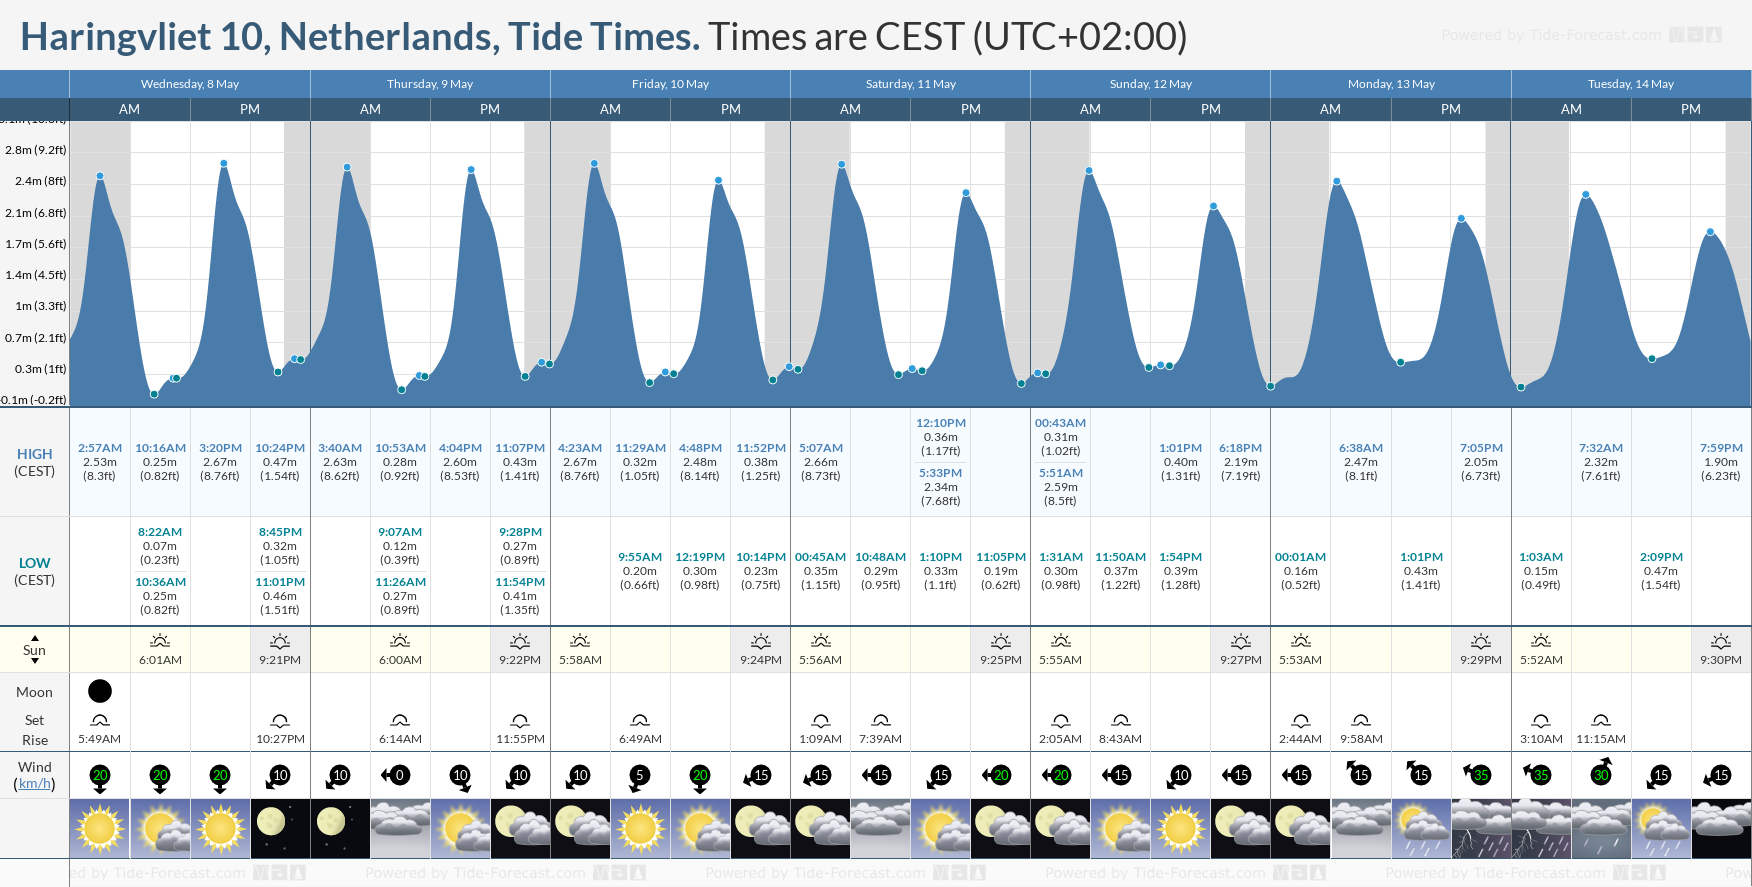 Haringvliet 10, Netherlands Tide Chart including high and low tide tide times for the next 7 days